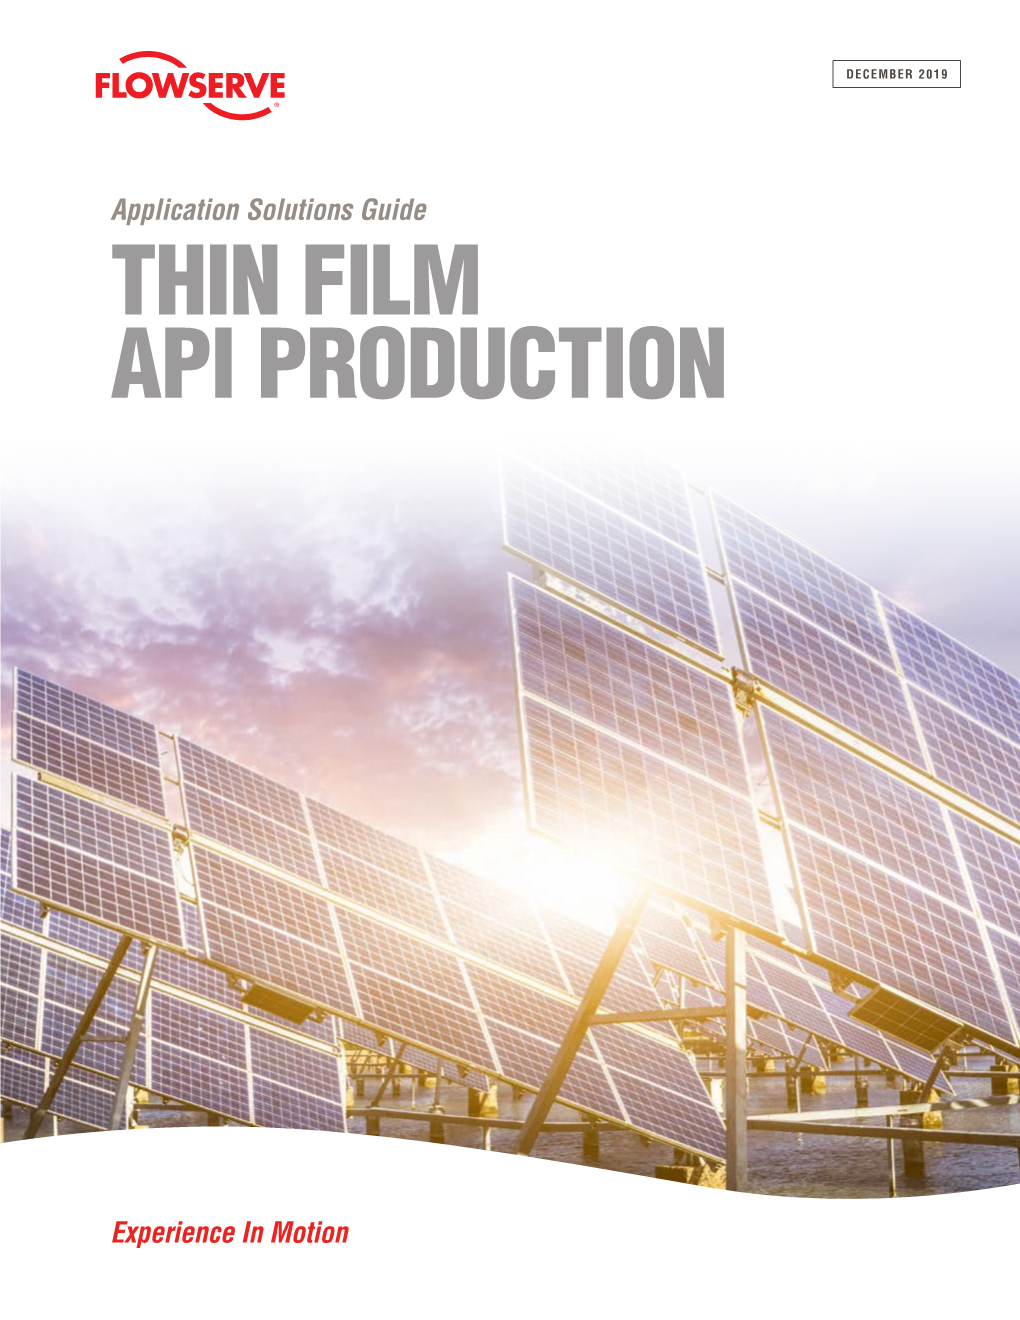 Thin Film API Production Application Solutions Guide